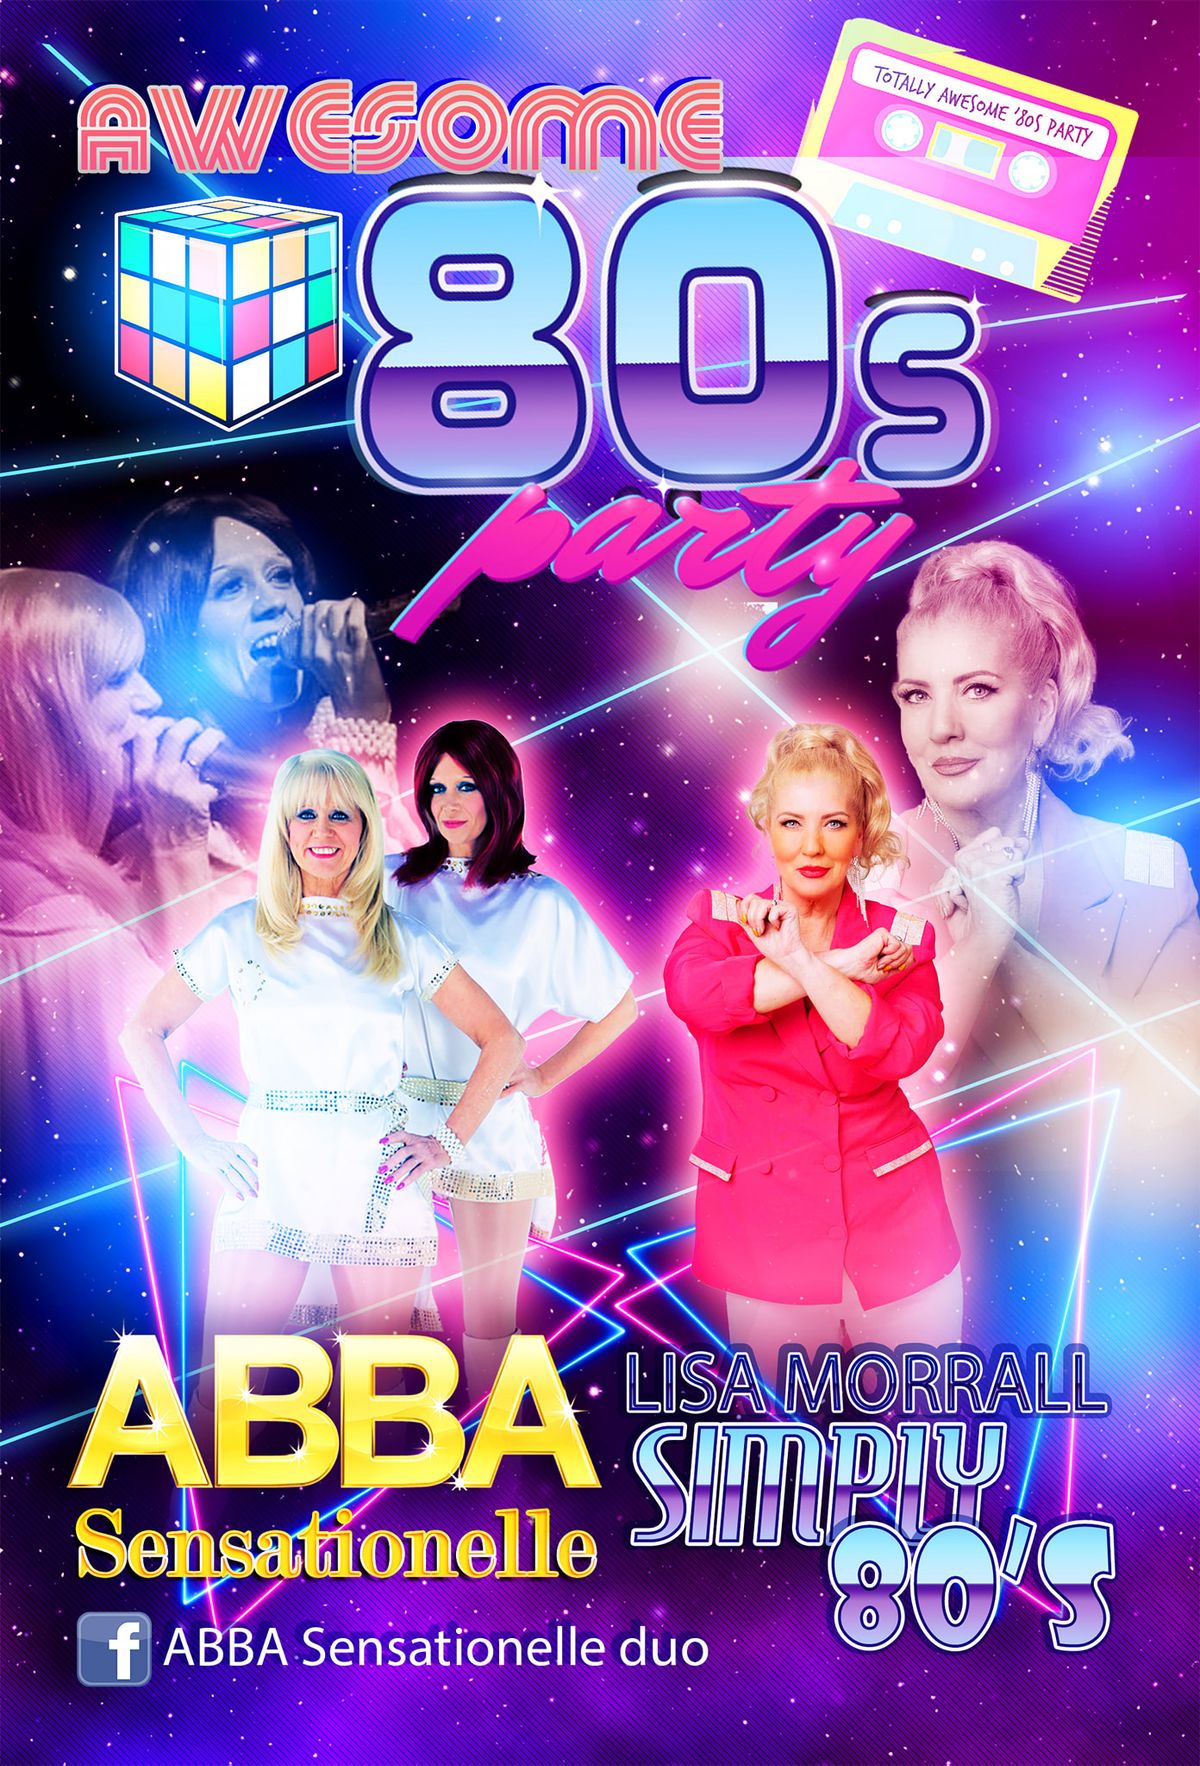 ABBA Sensationelle duo Simply 70s &80s by Lisa Morrall